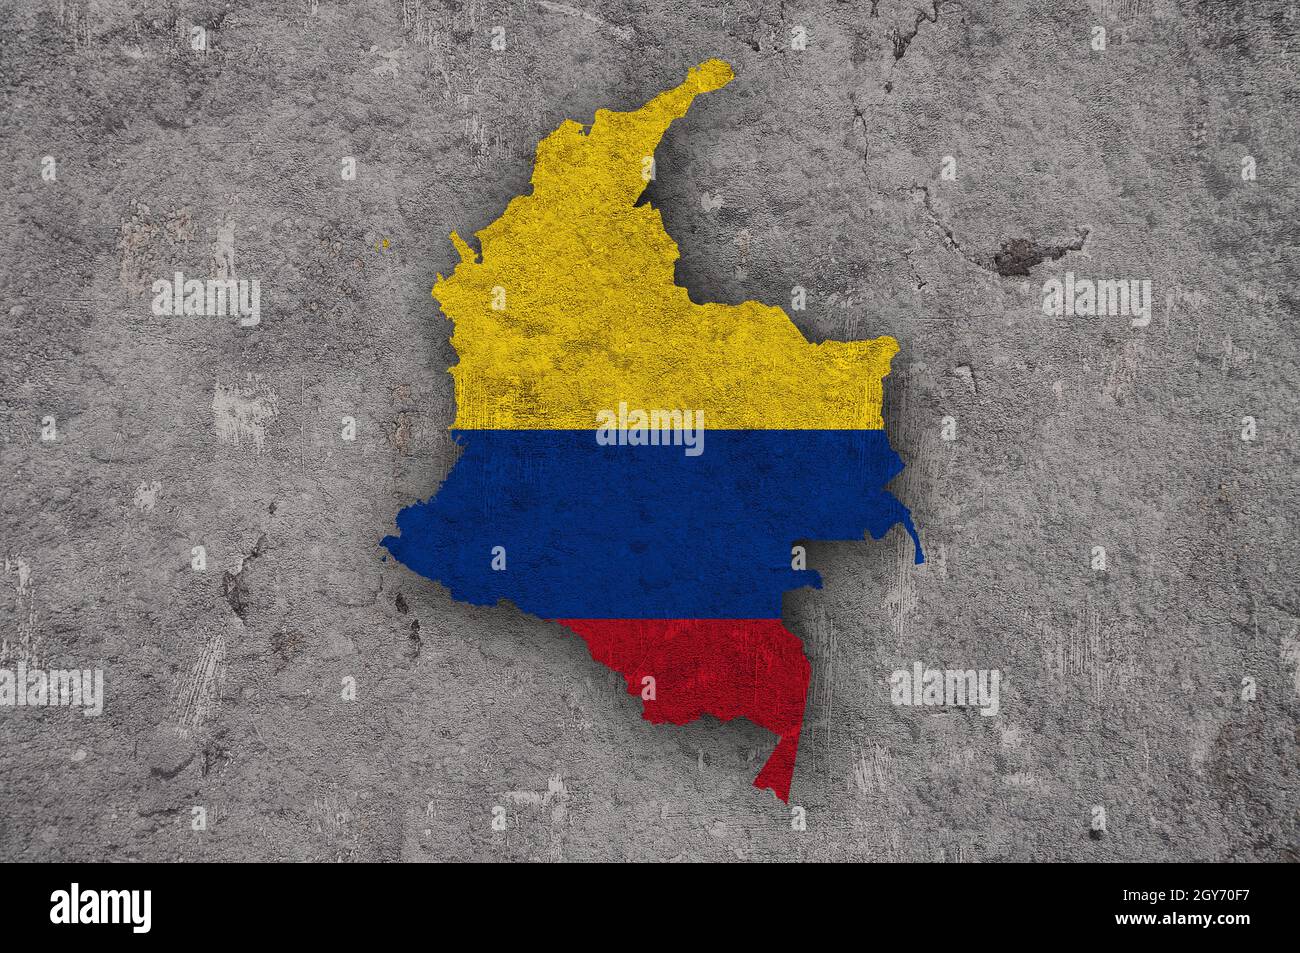 Map and flag of Colombia on weathered concrete Stock Photo